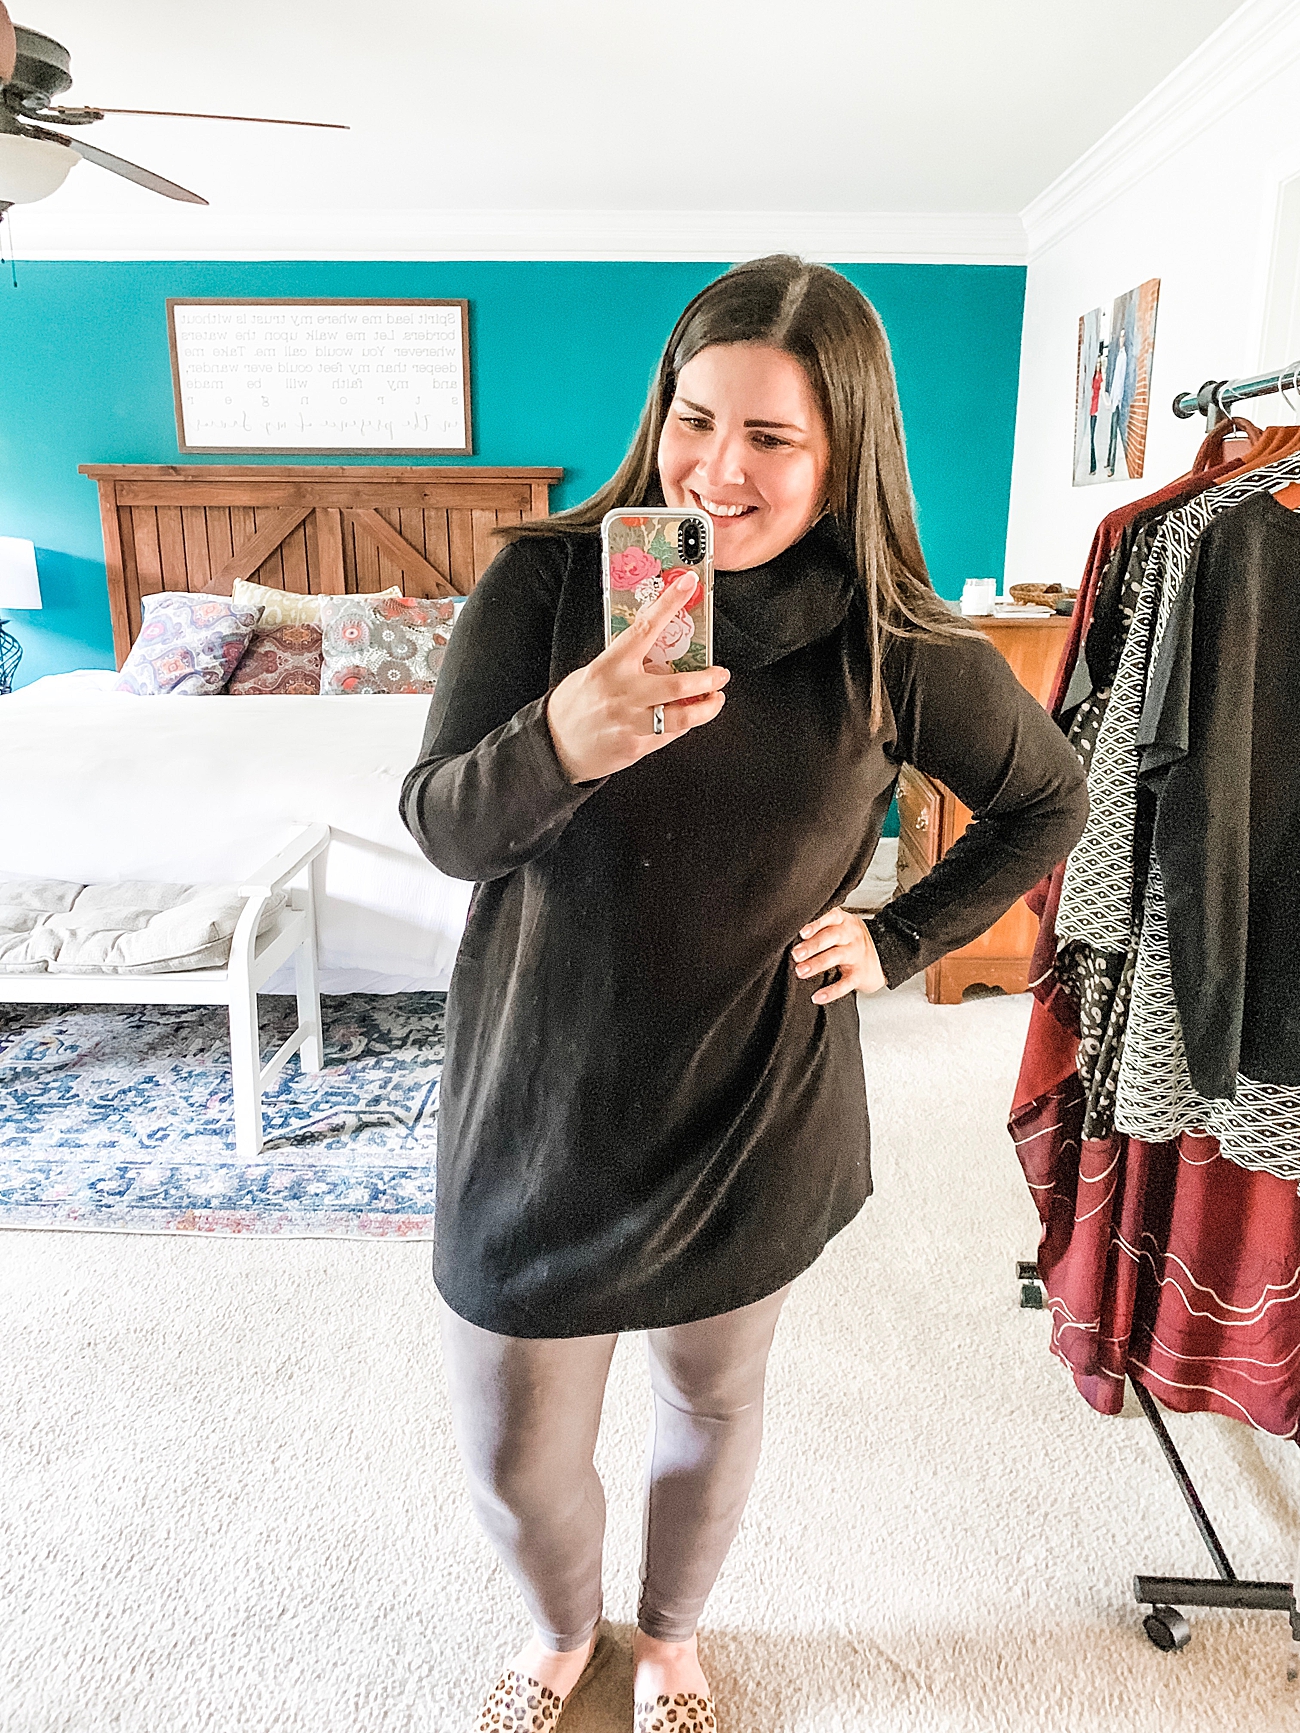 Sseko Designs Fall 2019 Sojourner Collection | Review + Try-On | Fair Trade Fashion #fairtradestyle #ethicalfashion http://www.ssekodesigns.com/mollystillman (12)